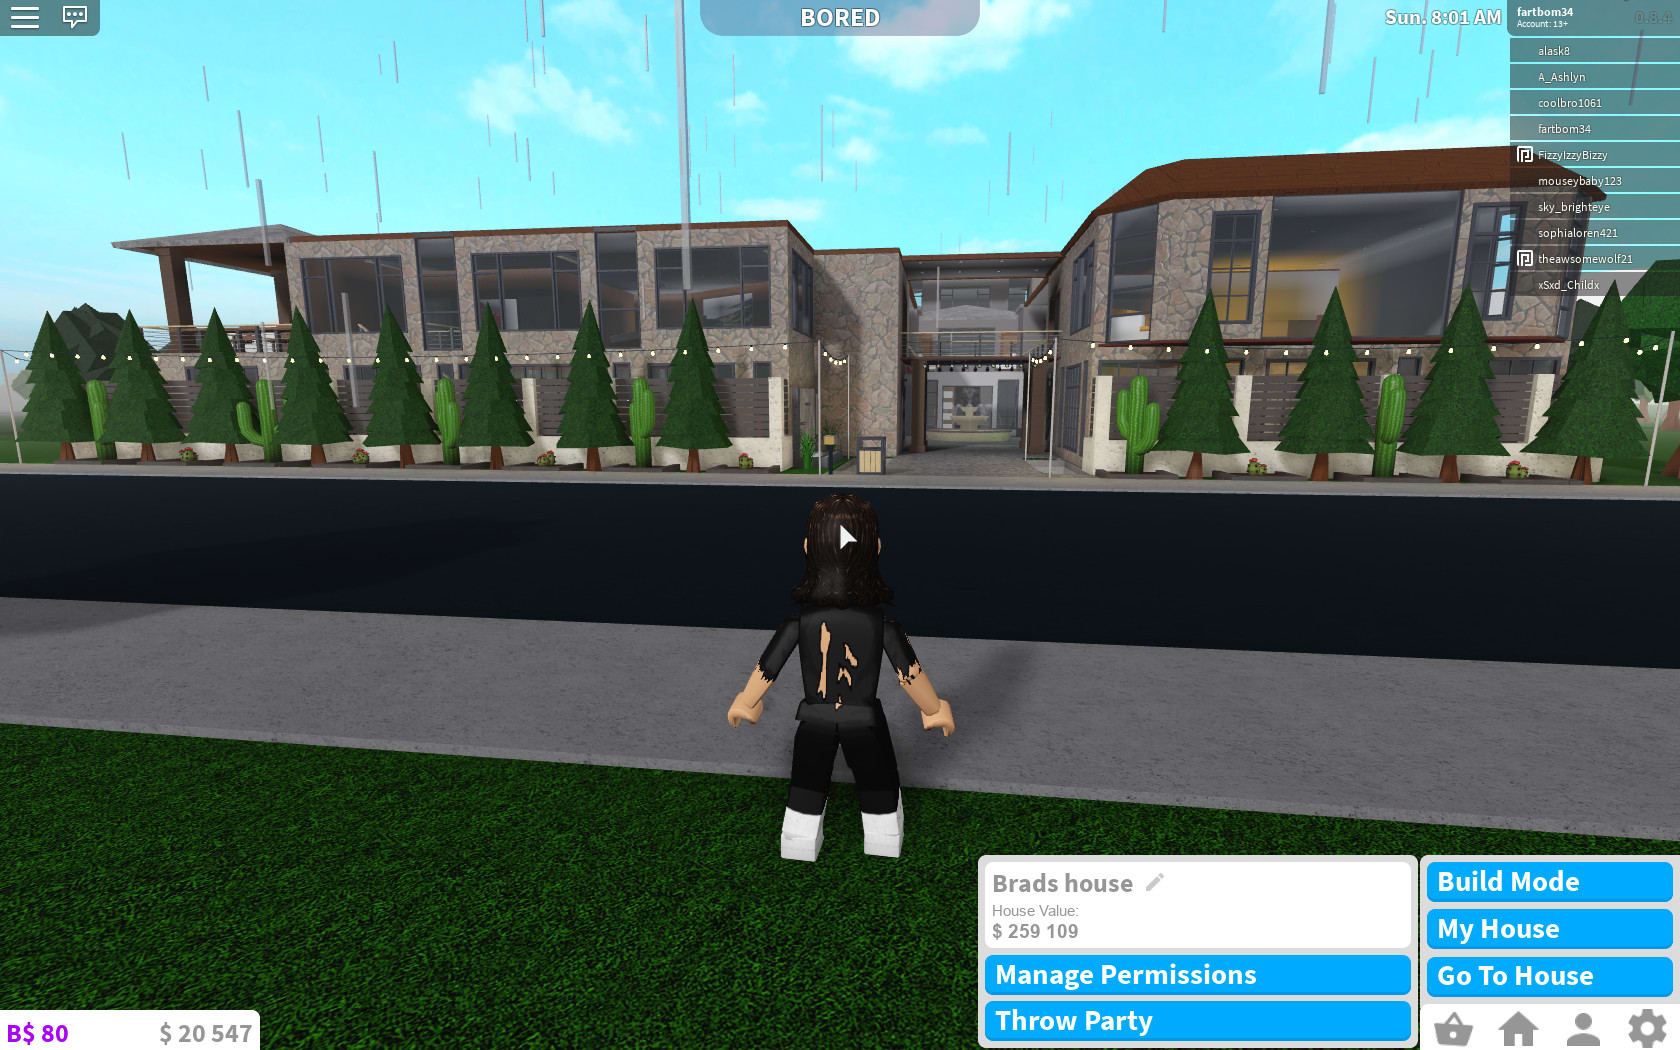 Can Build A House For U In Welcome To Blox Burg Roblox By Fartbom34